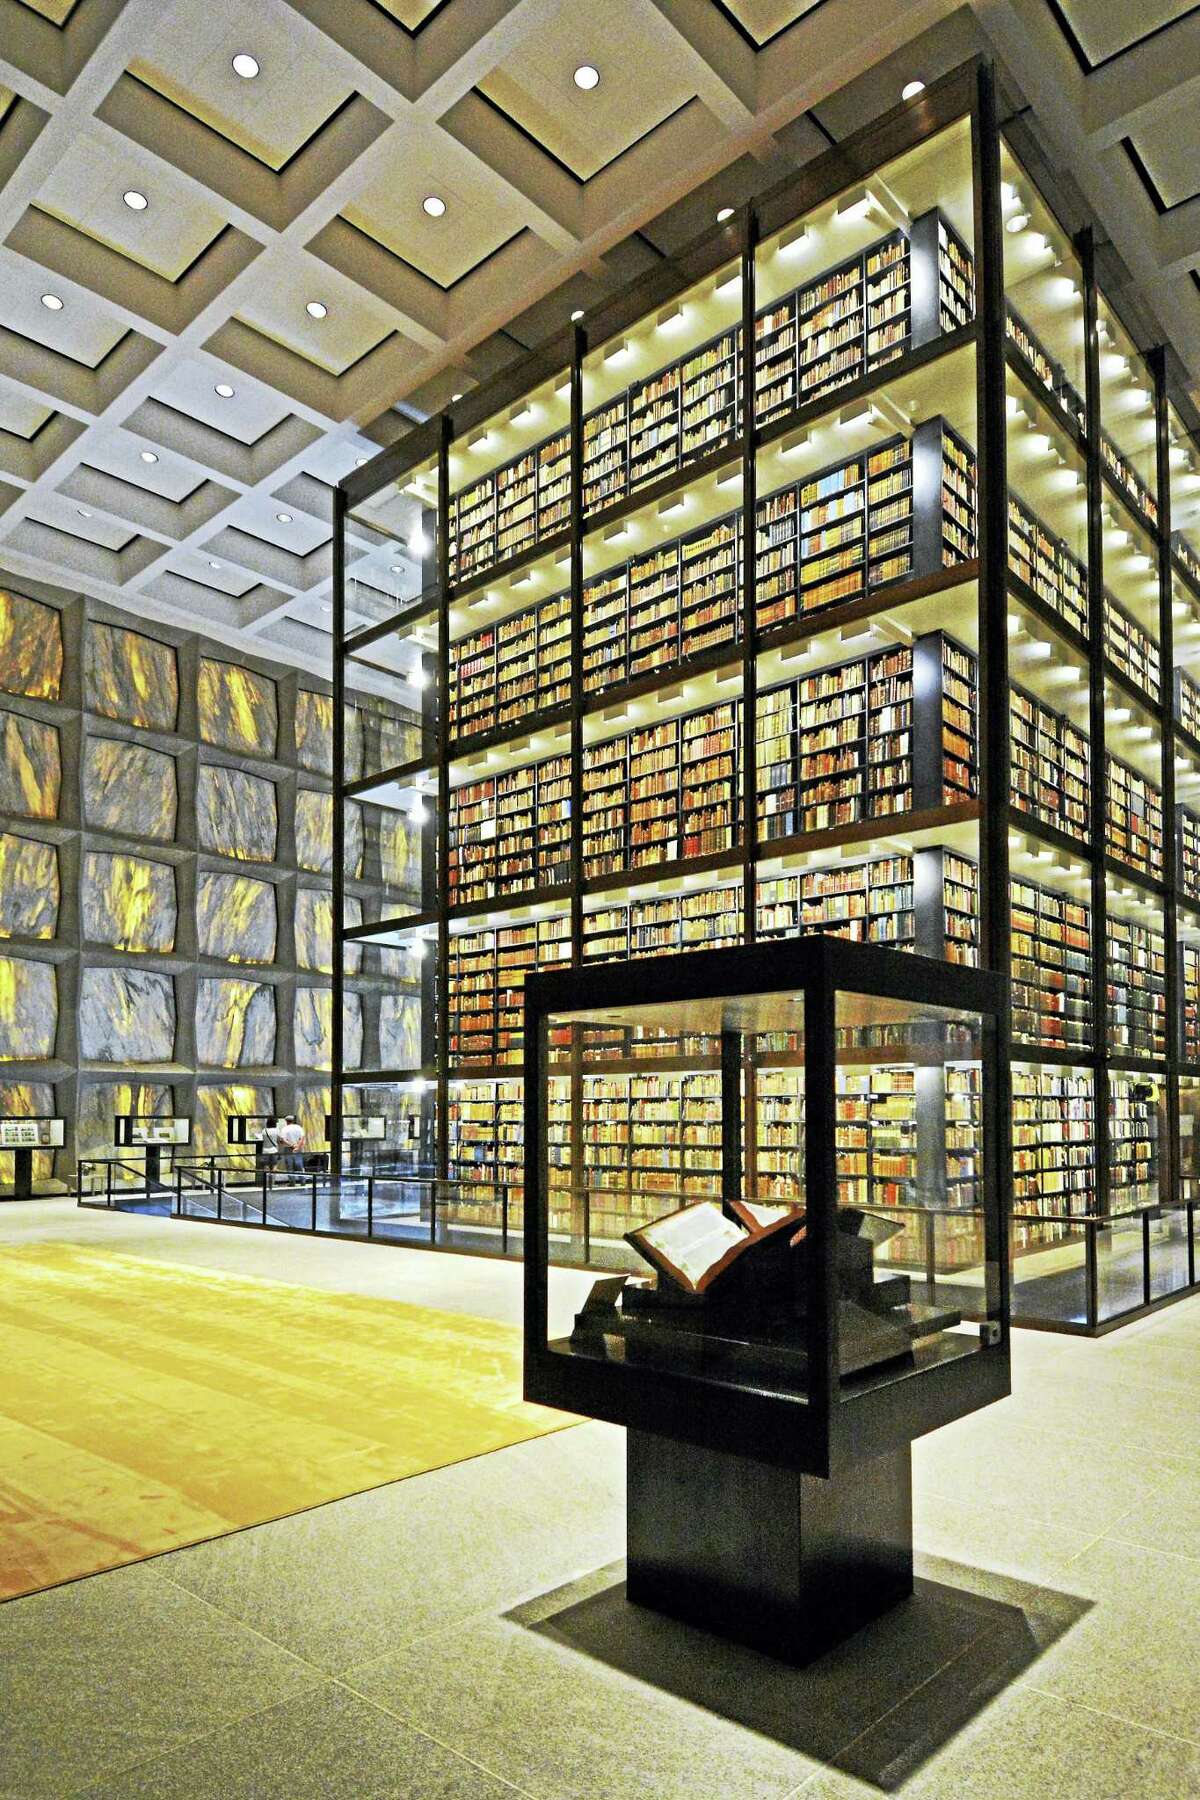 Restored and renovated Beinecke Rare Book and Manuscript Library, with exhibition cases surrounding the stacks and translucent marble wall panels.